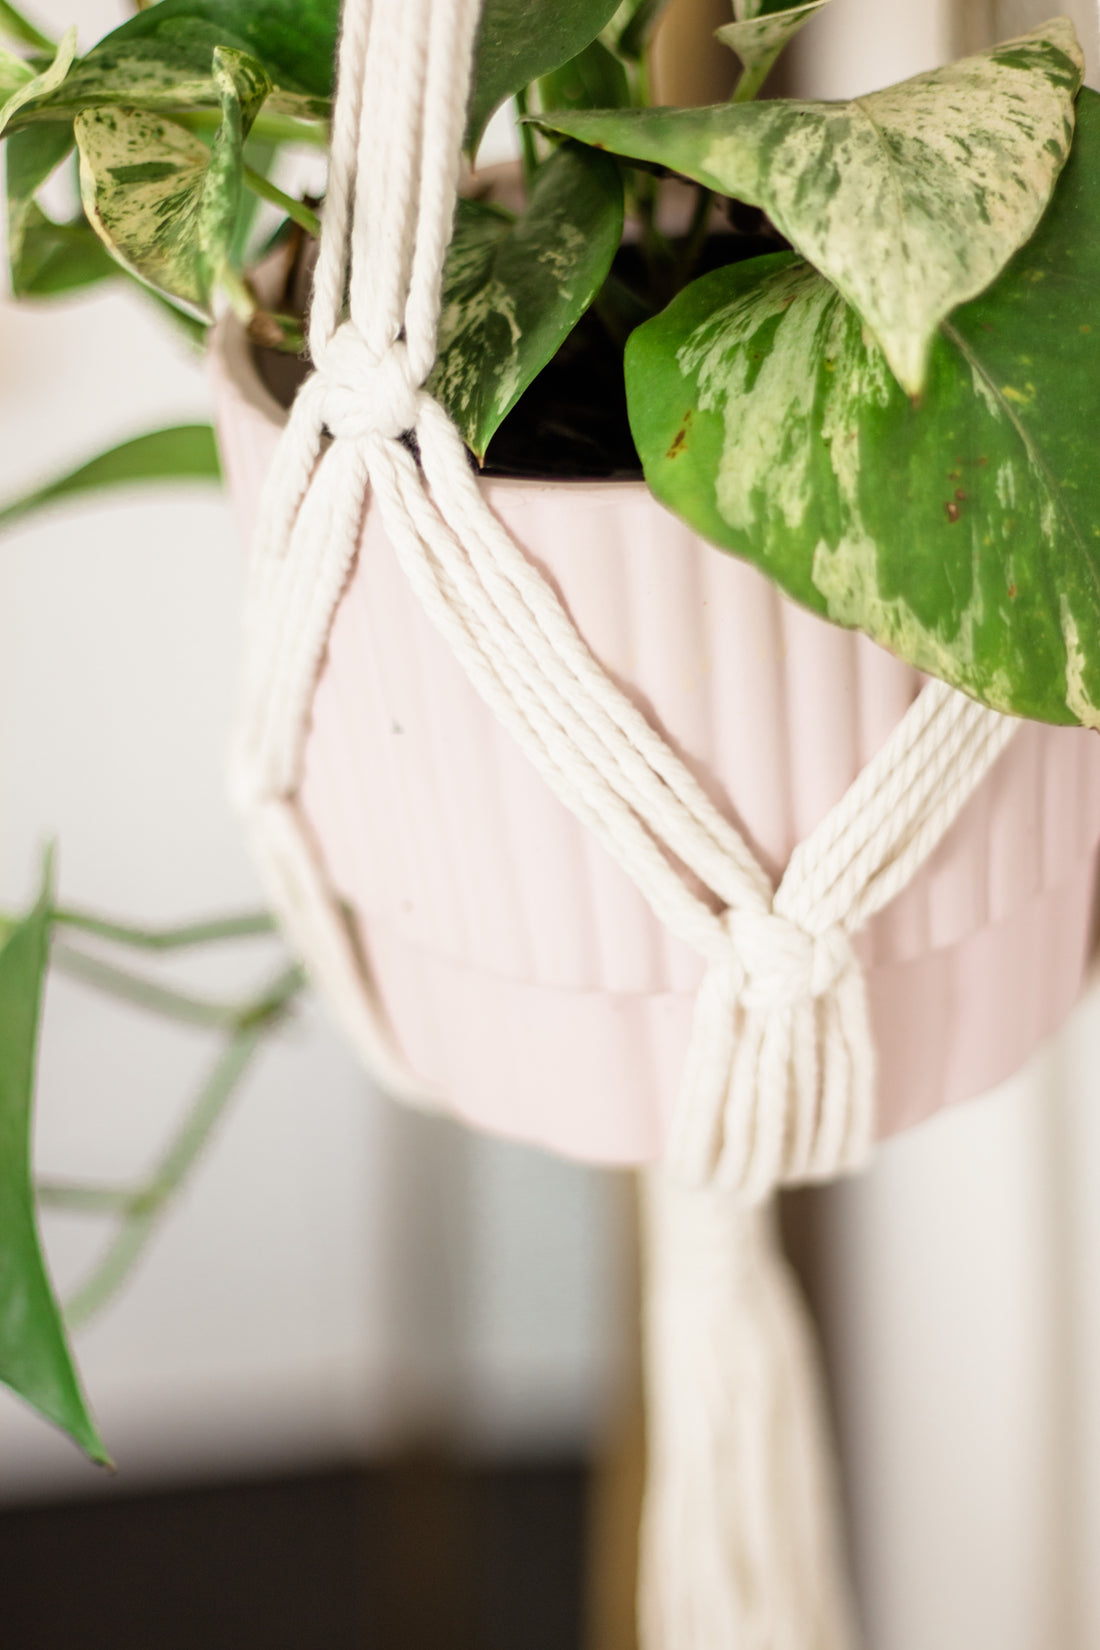 Macramé, the art of knotting cord or rope, has been around for centuries and is making a comeback as a popular form of home decor. With its intricate designs and bohemian vibe, macramé adds a touch of warmth and personality to any room.